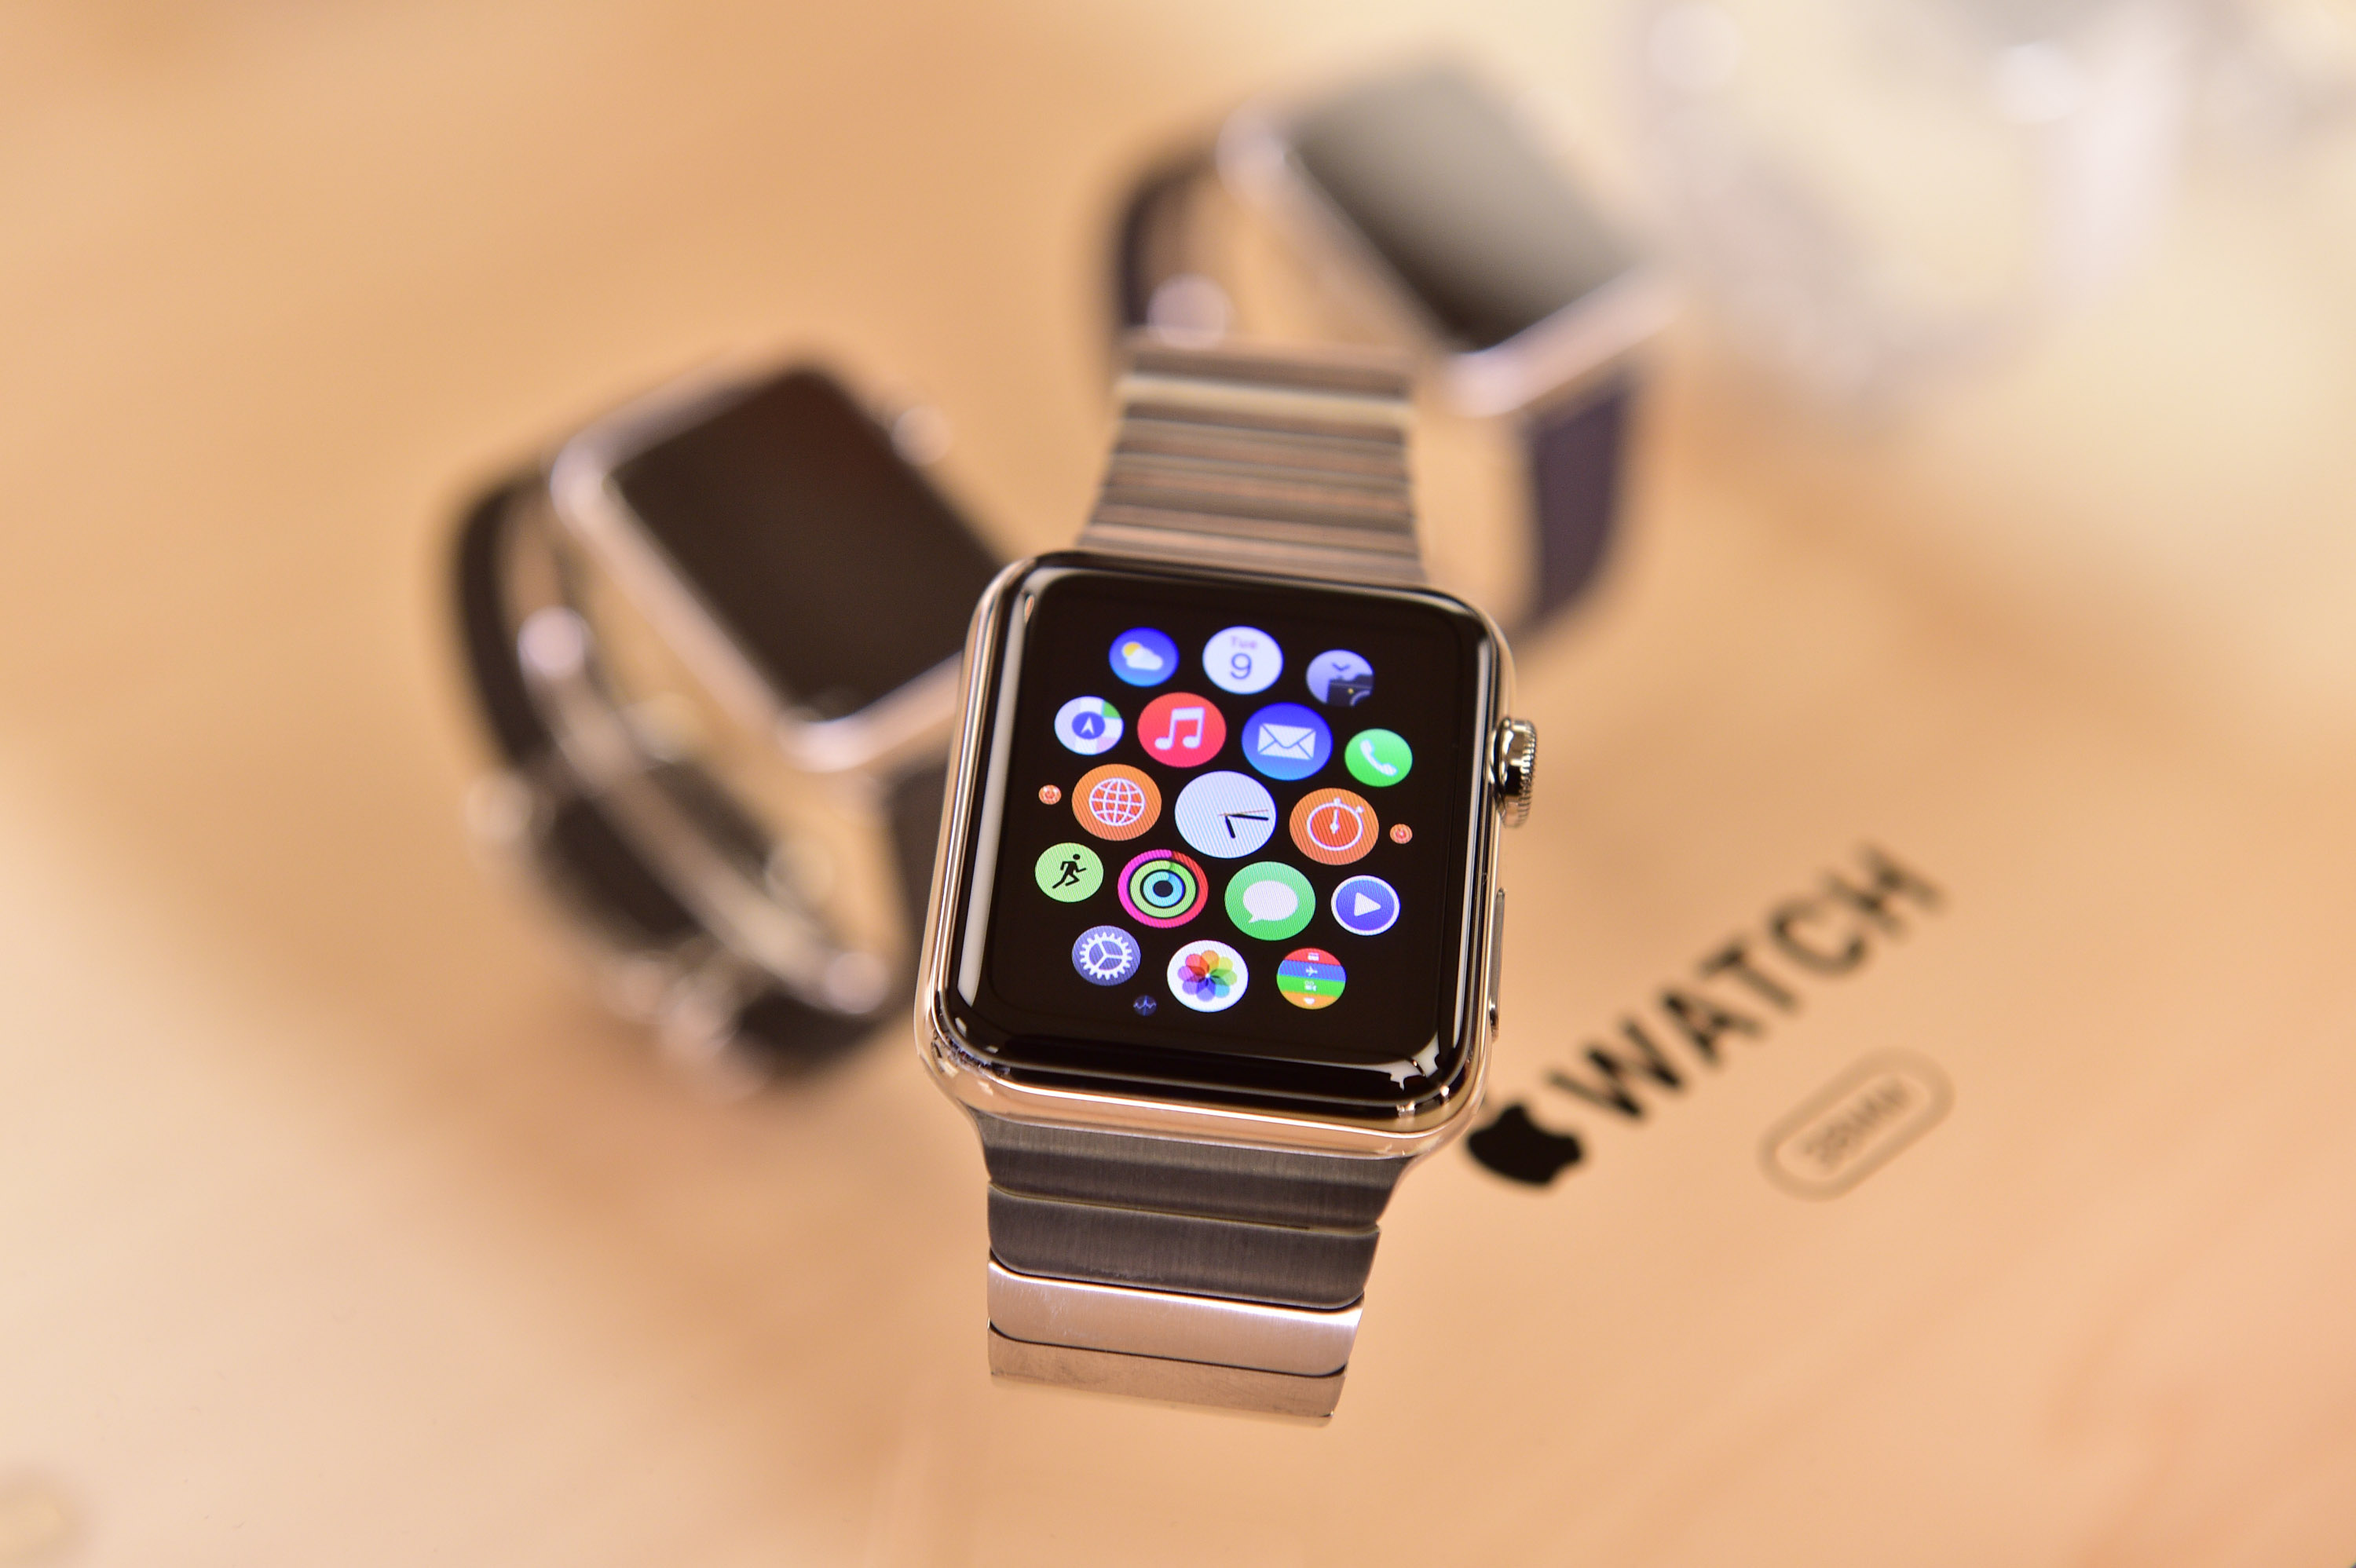 The Apple Watch, officially released on April 24, 2015. The sport model starts at $349. The mid-tier Apple Watch starts at $499, while the Apple Watch Edition starts at $10,000.